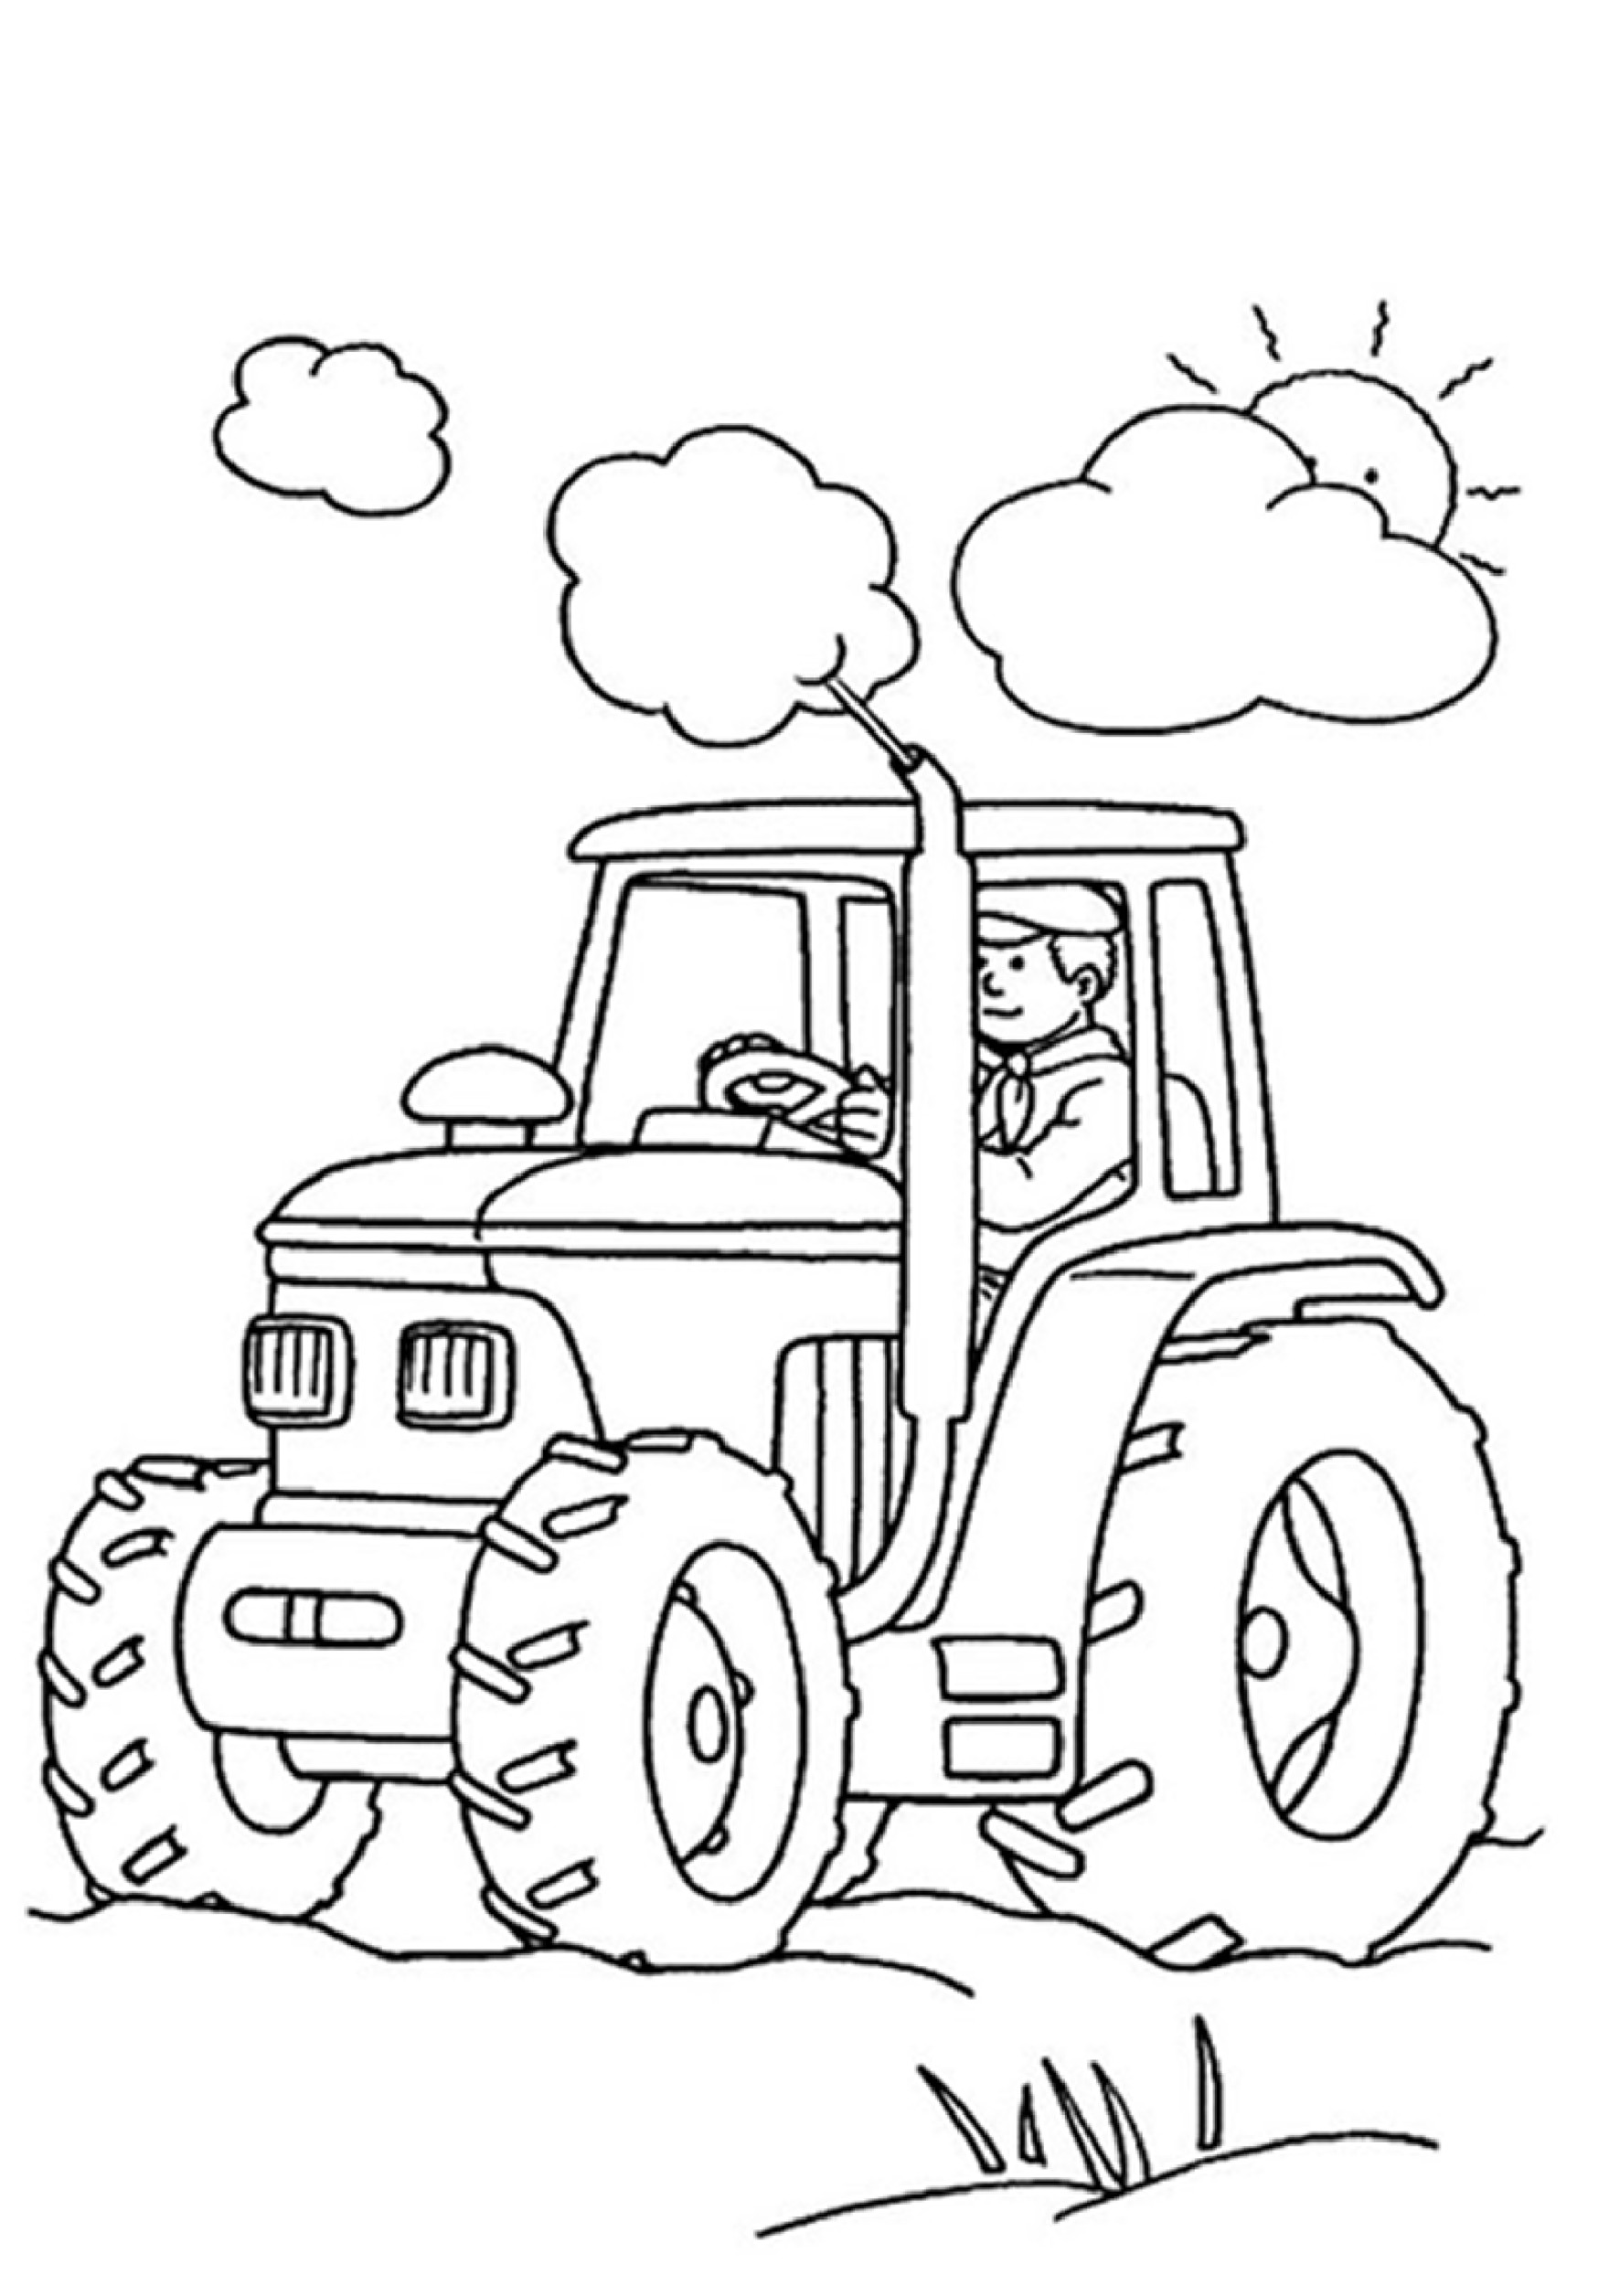 Coloring Pages For Boys To Print
 Coloring Town